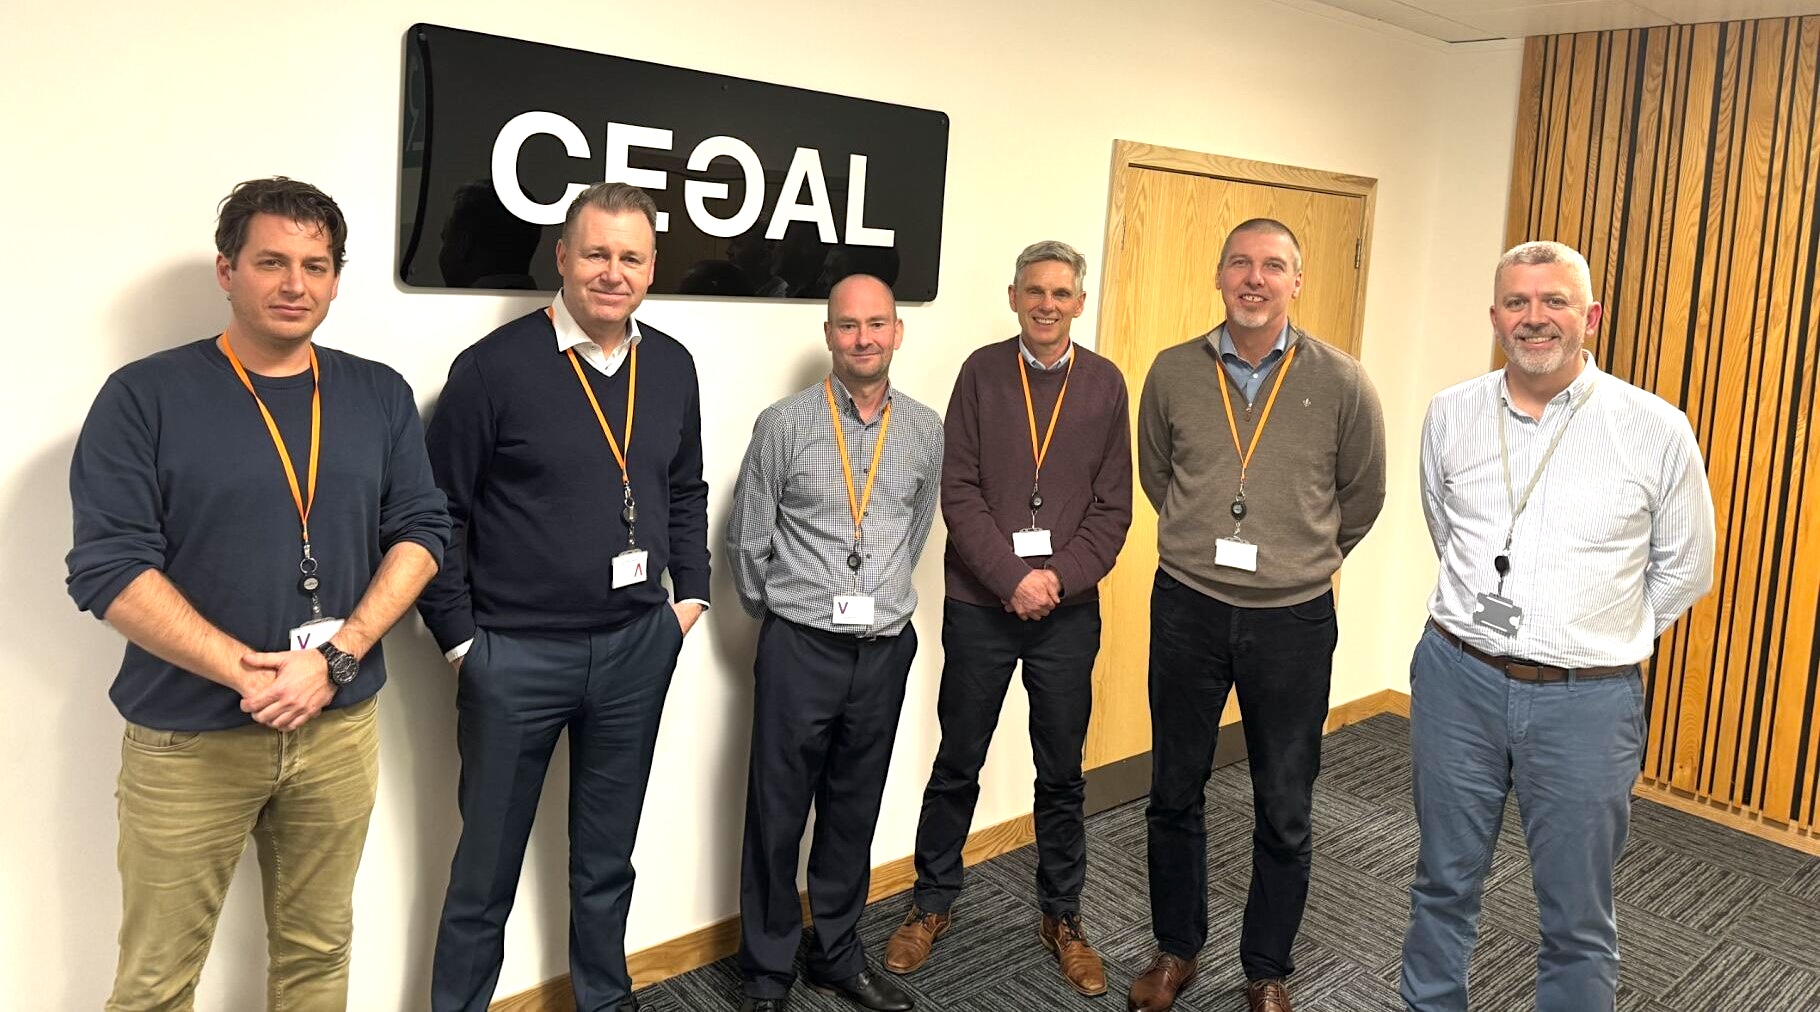 MEMBER NEWS: Cegal acquires GSES Ltd to enhance their international footprint in hydrocarbon accounting and production management